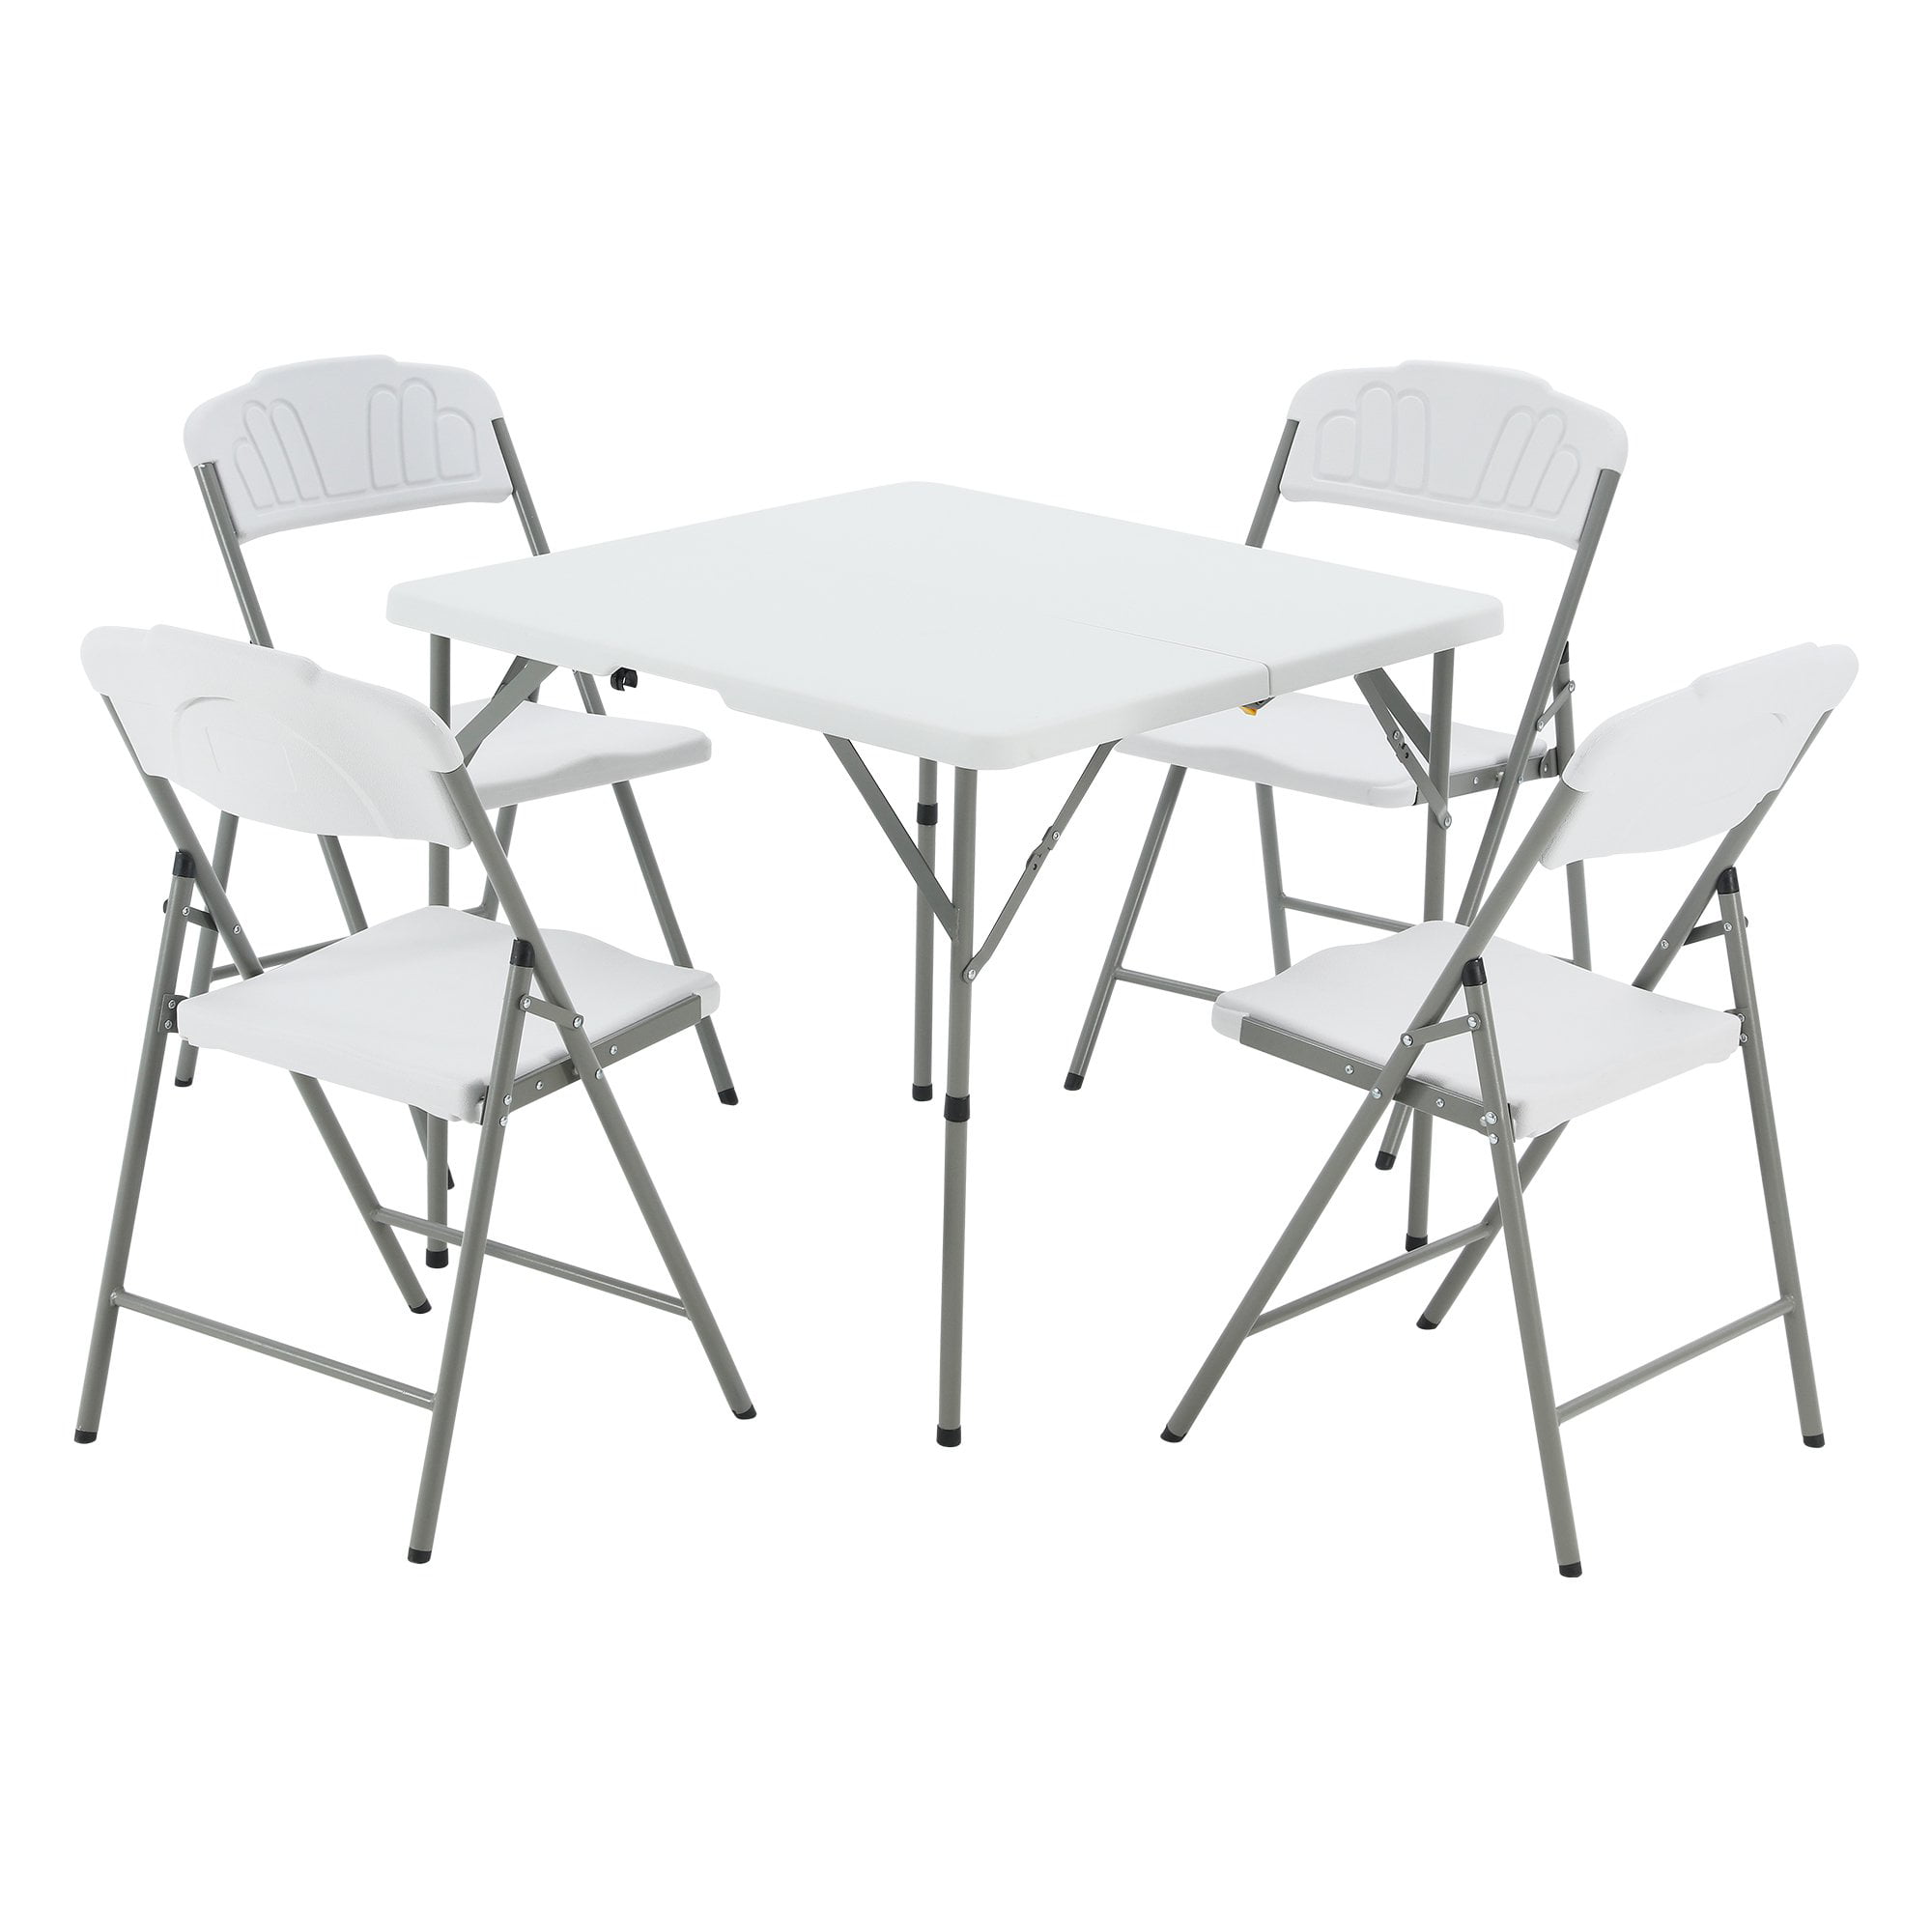 Garden Market Place Oxford 4 Seater Garden Dining Set-4 Folding Chairs and a Mesh TopTable 100 X 100 X 70CM